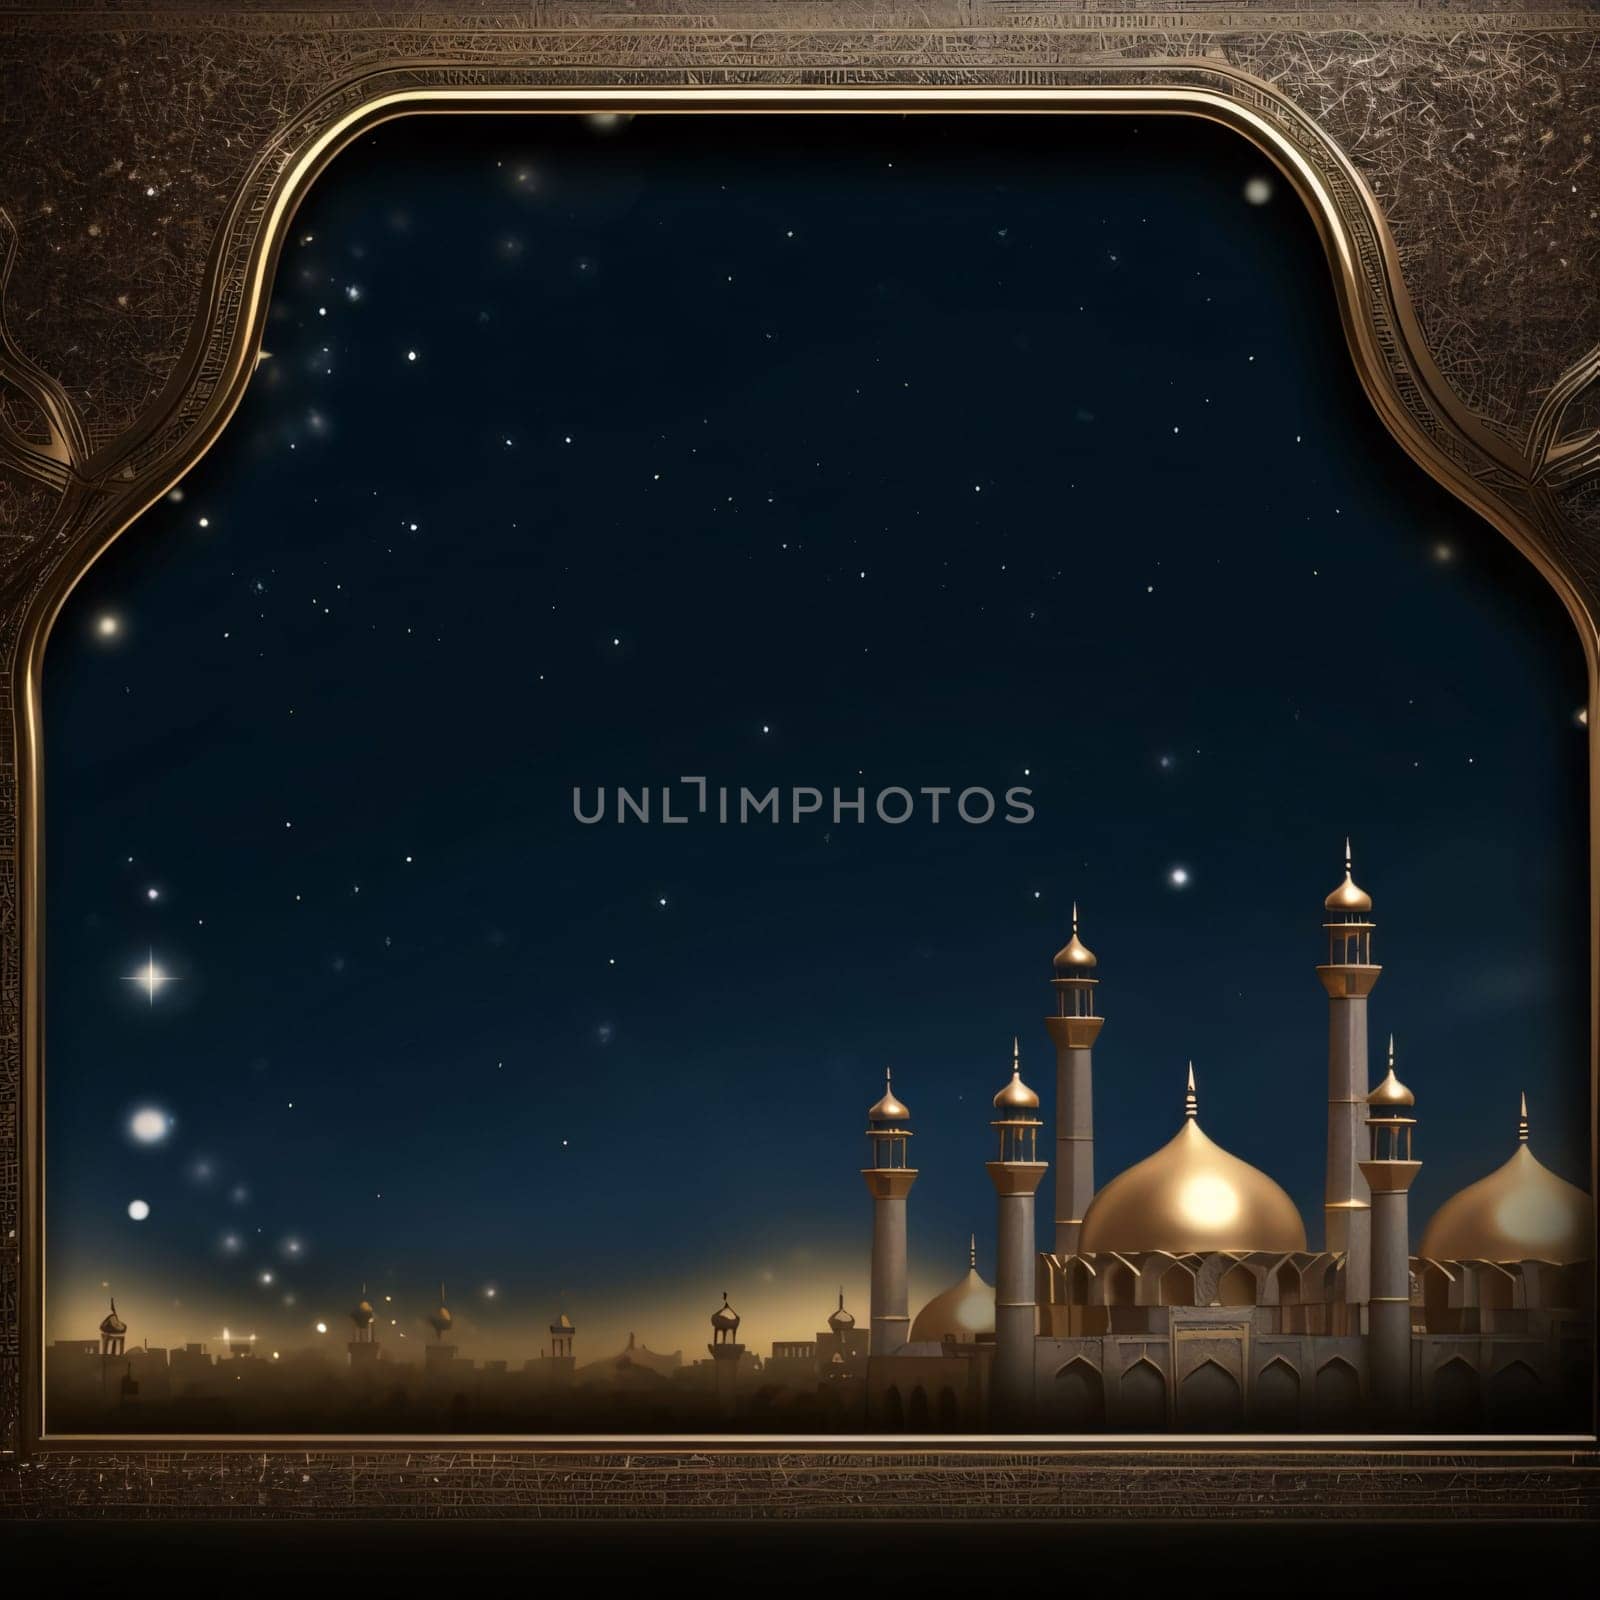 Gold frame with an image, silhouette of a golden mosque against a night sky background, empty field with space for your own content. Lantern as a symbol of Ramadan for Muslims. A time to meet with God.